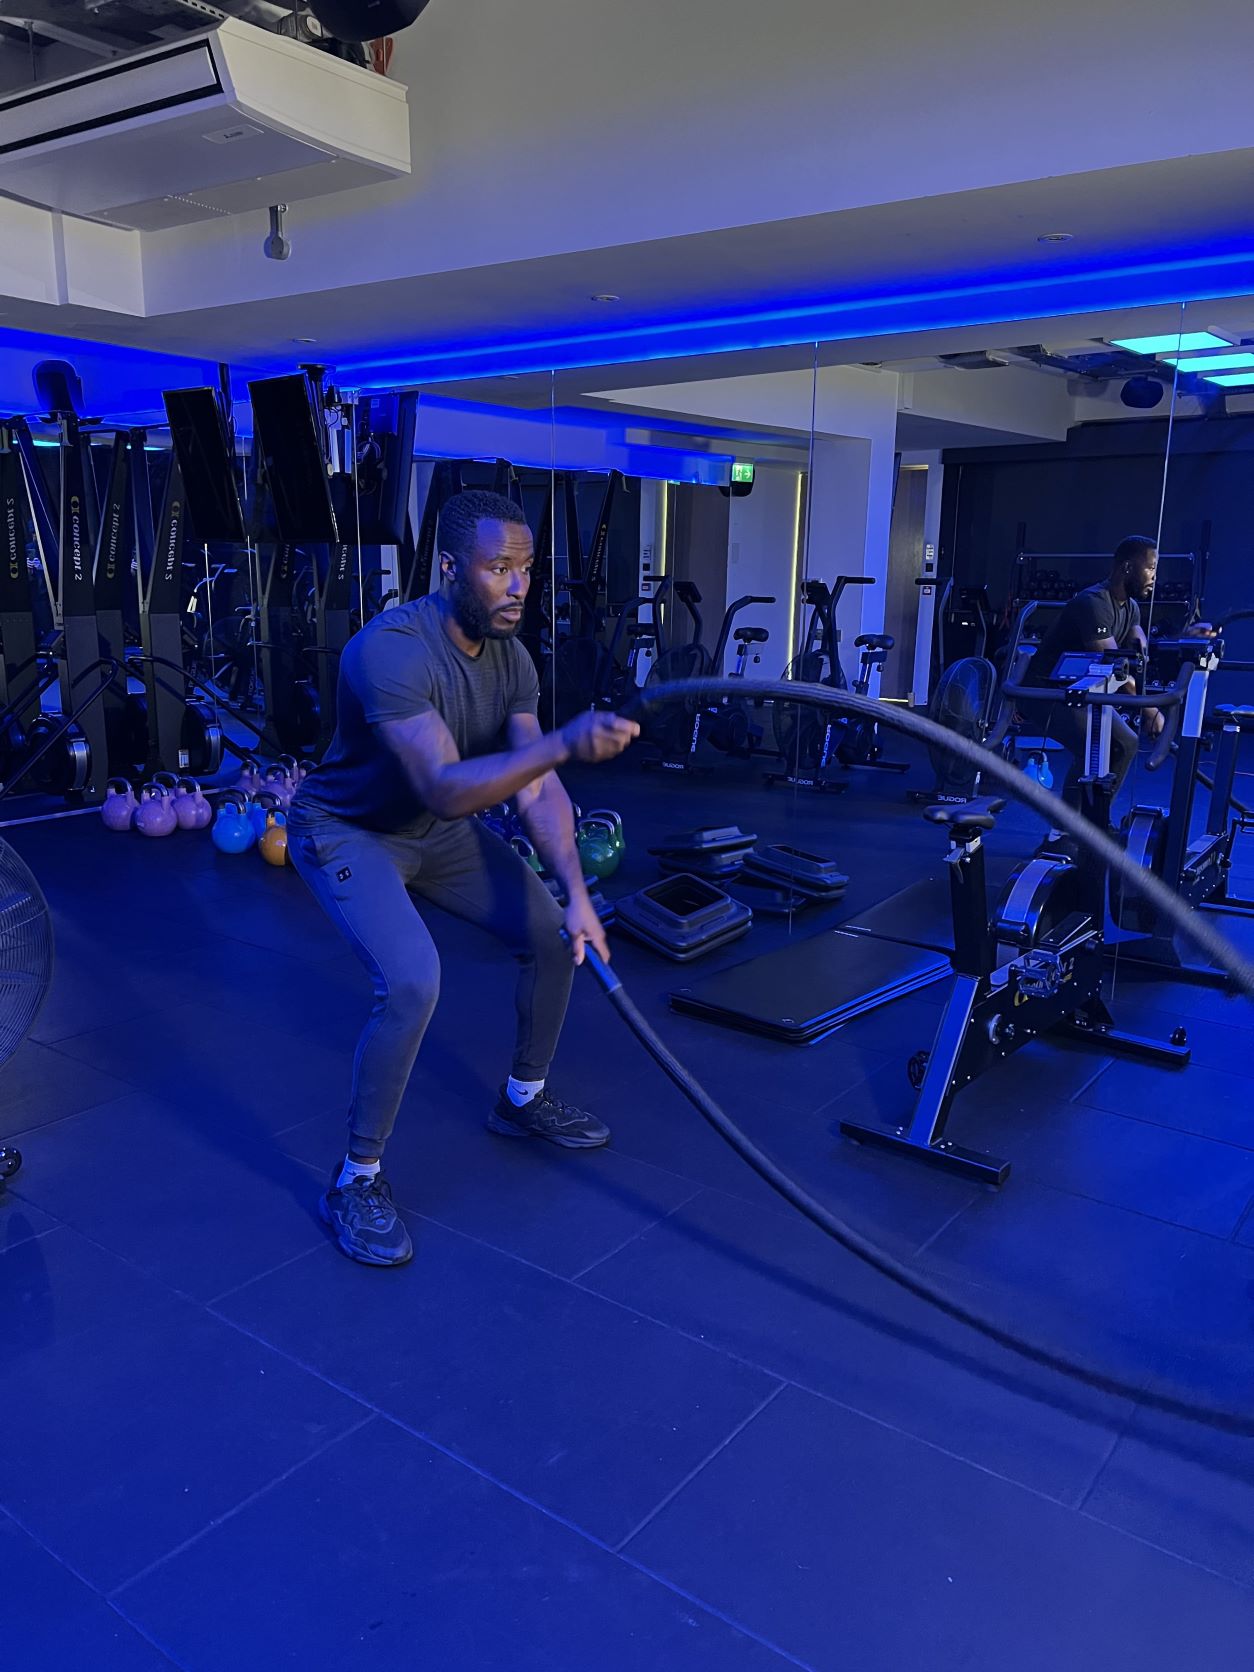 man demonstrates how to use battle ropes at the gym; bent over, he holds a heavy rope in each hand and alternately raises and lowers each one